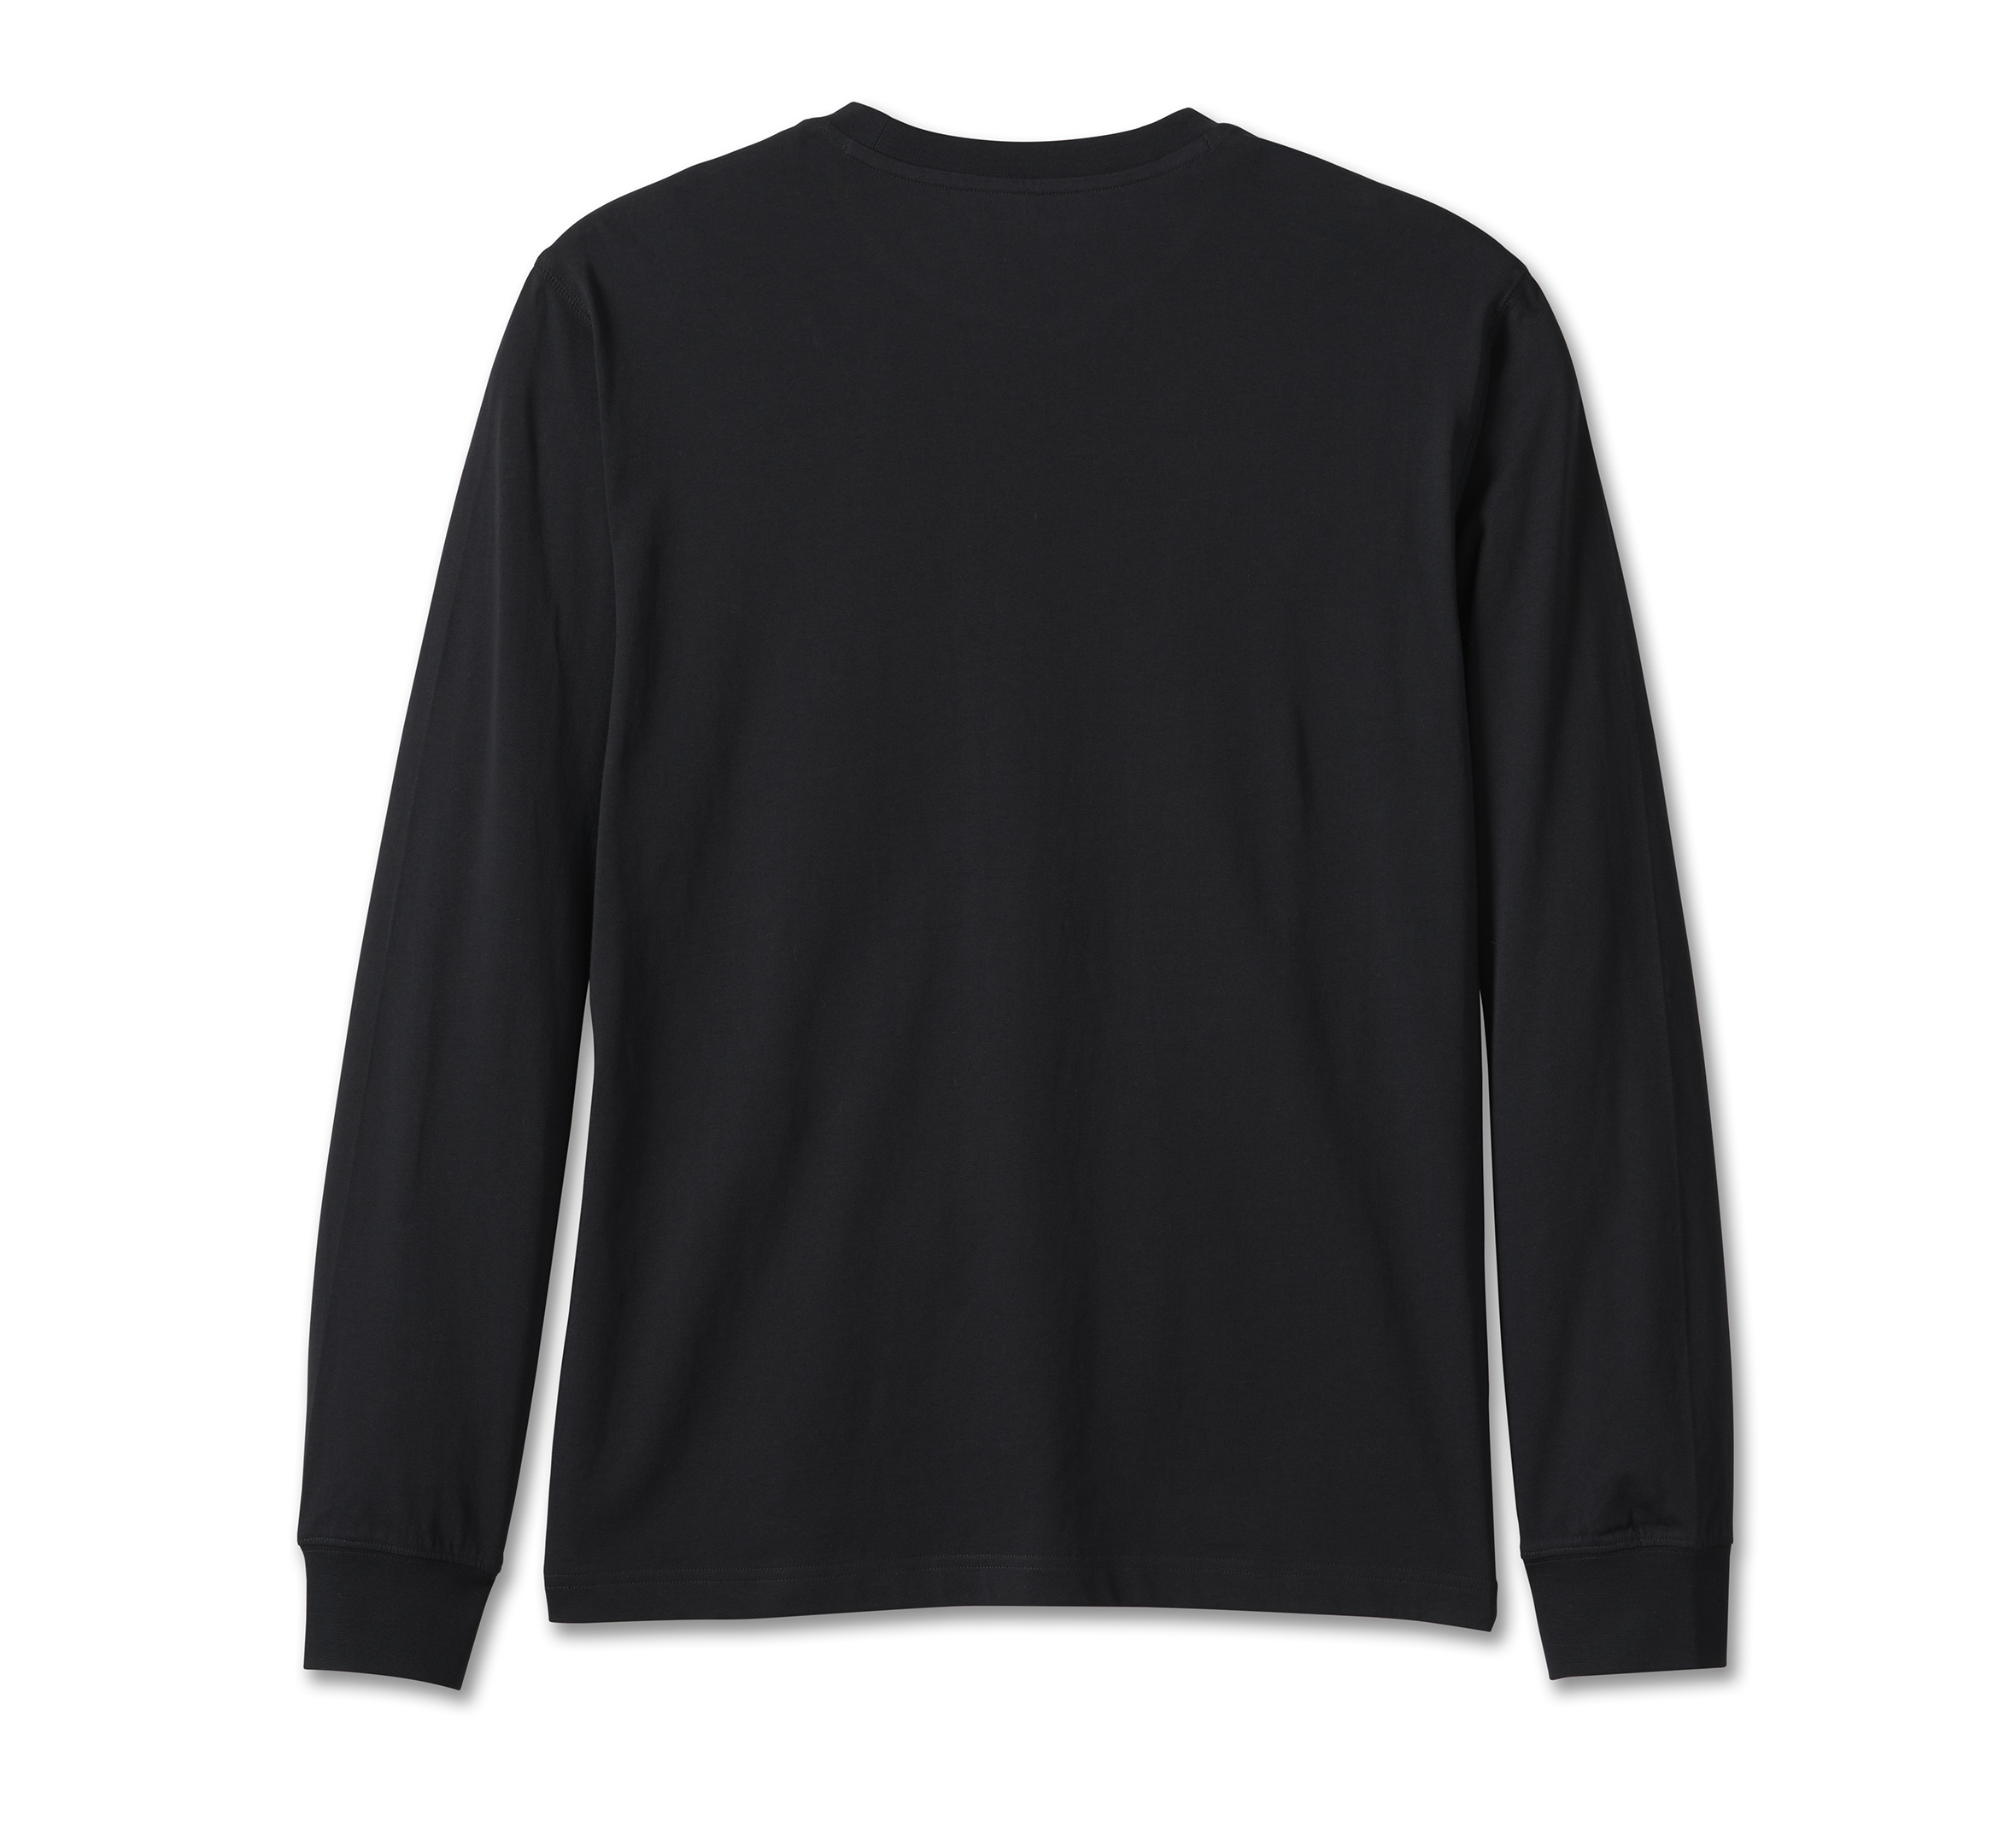 Letter Print Black Long-sleeve Crewneck Sweatshirts for Dad and Me